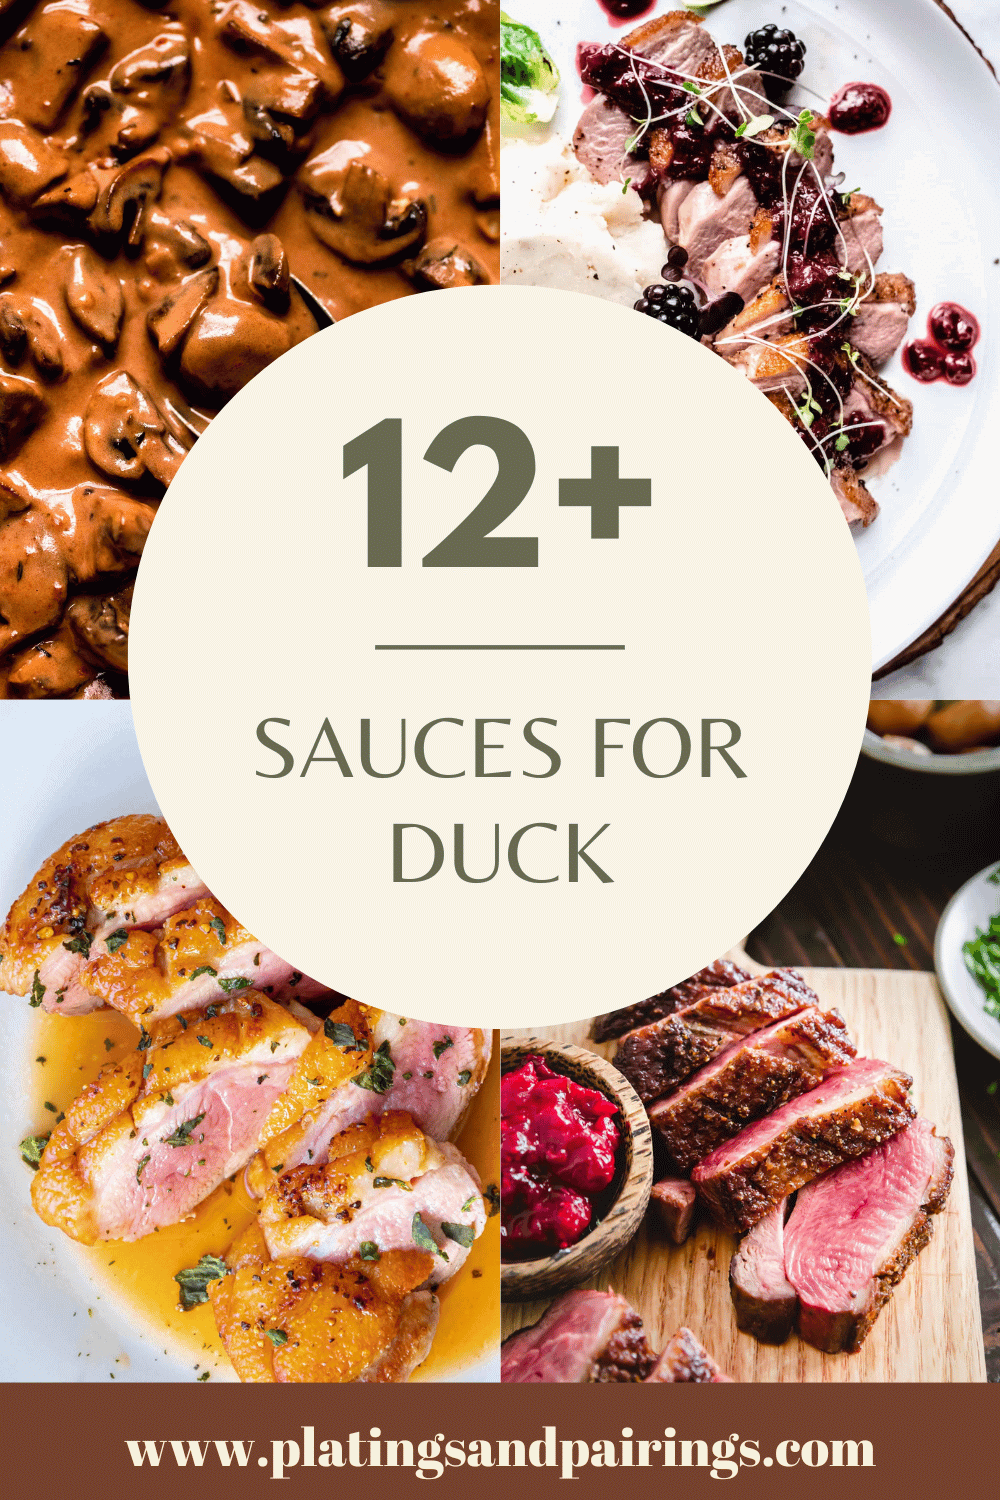 Collage of sauces for duck with text overlay.